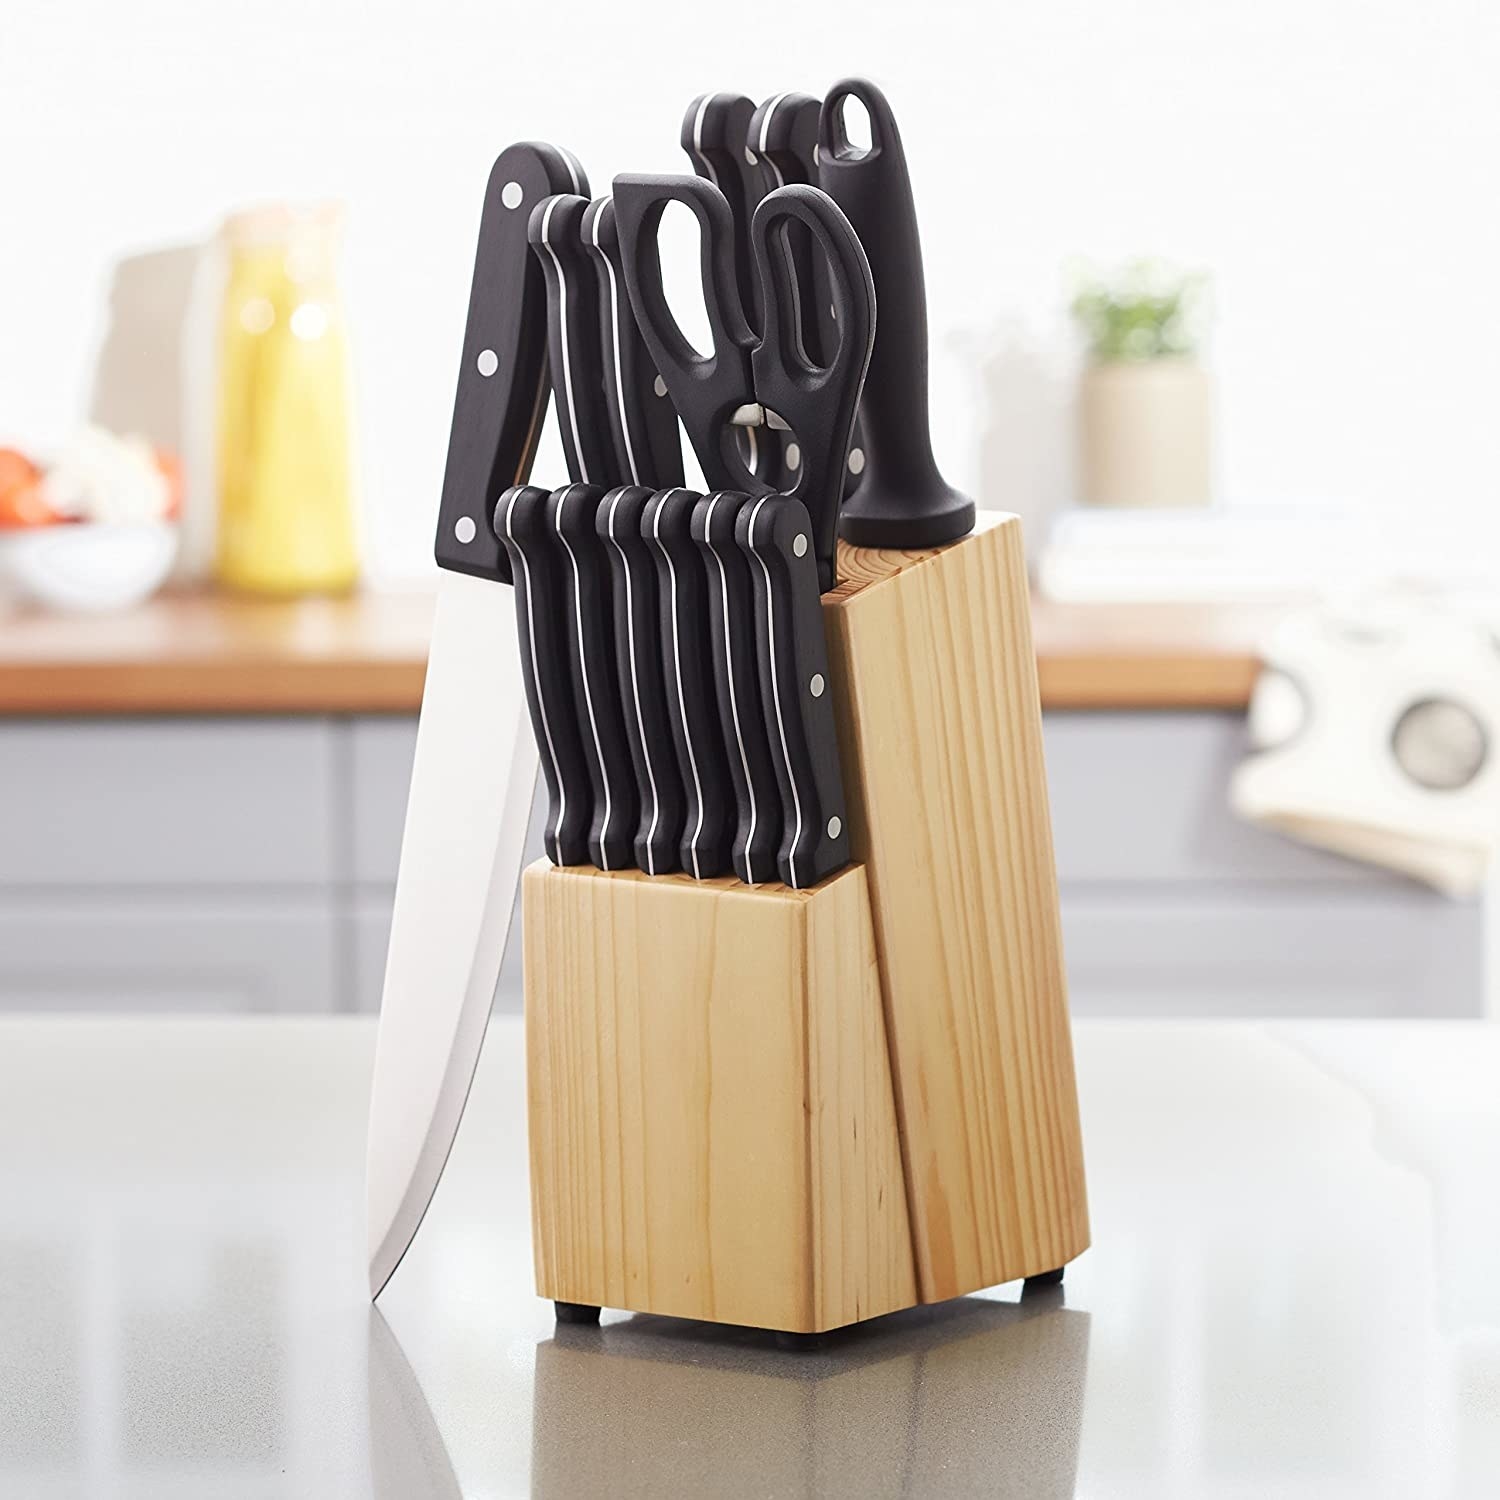 The knife set in a pine wood block on a kitchen counter